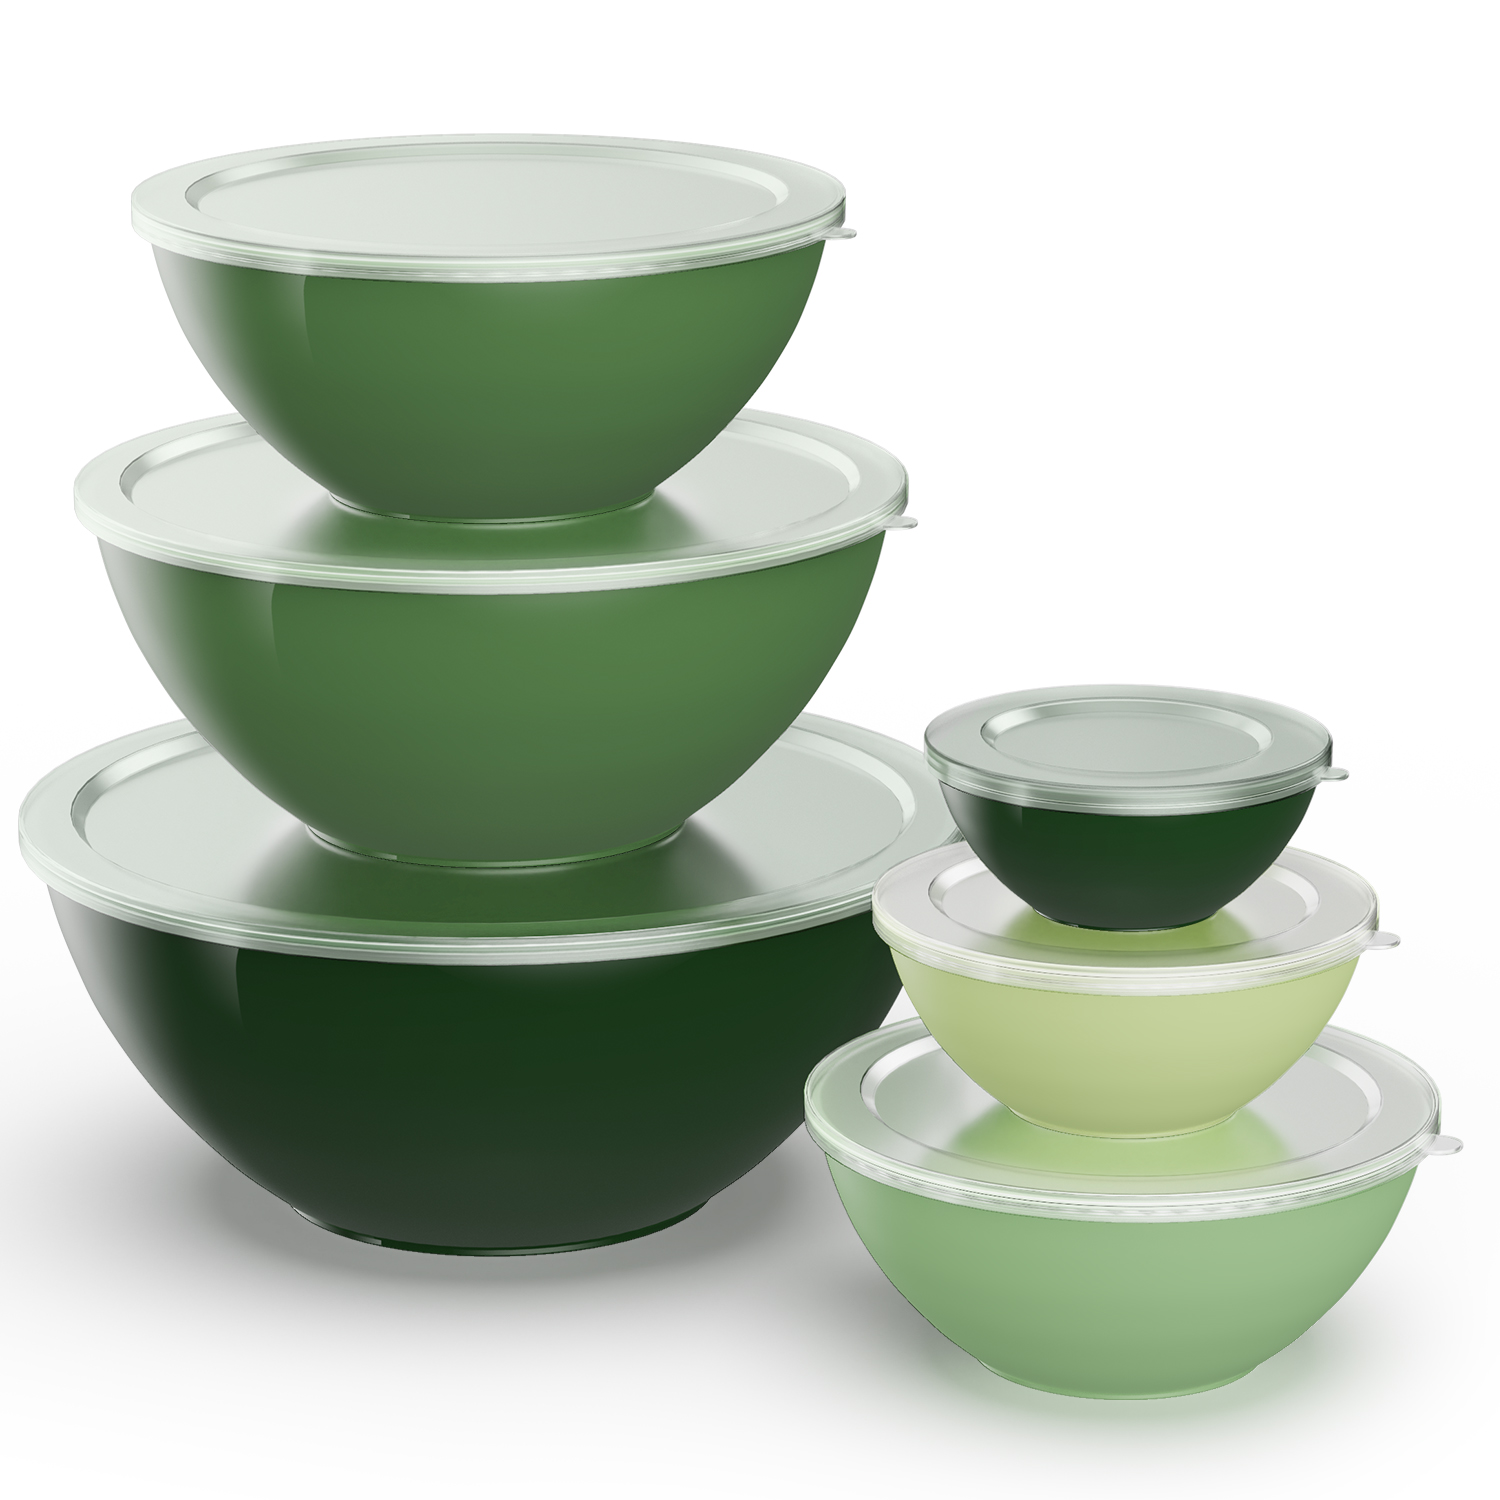 TINANA Plastic Mixing Bowls with Lids Set - 12 Piece Colorful Mixing Bowl Set for Kitchen - Nesting Bowls with Lids Set, 6 Prep Bowls and 6 Lids - Microwave and Freezer Safe (Green Ombre) - image 1 of 7